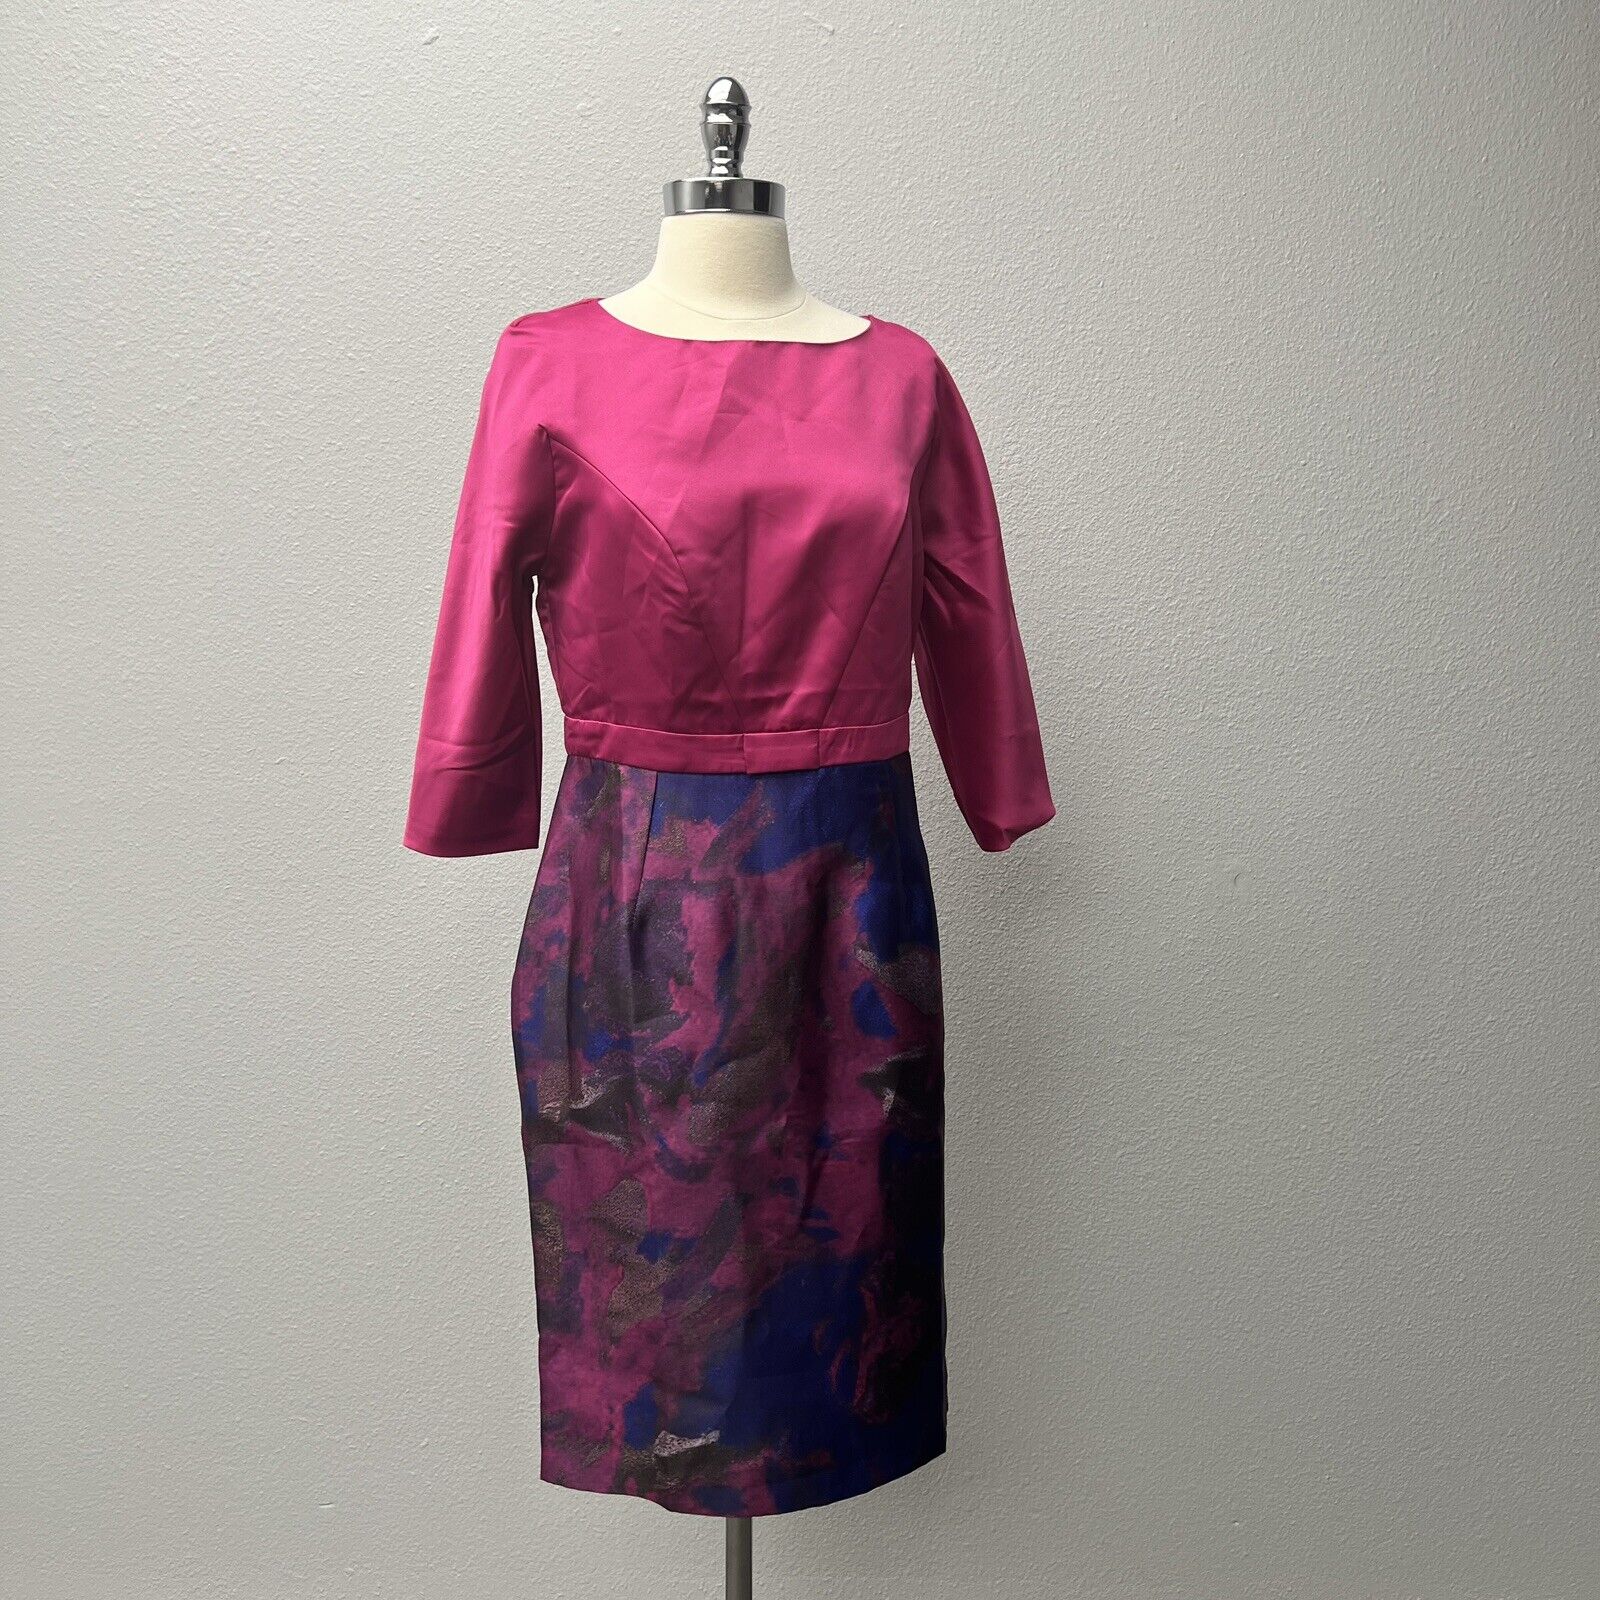 Alisa Style Dress Size L Satin Pink Watercolor Contrast Cocktail Event Sheath